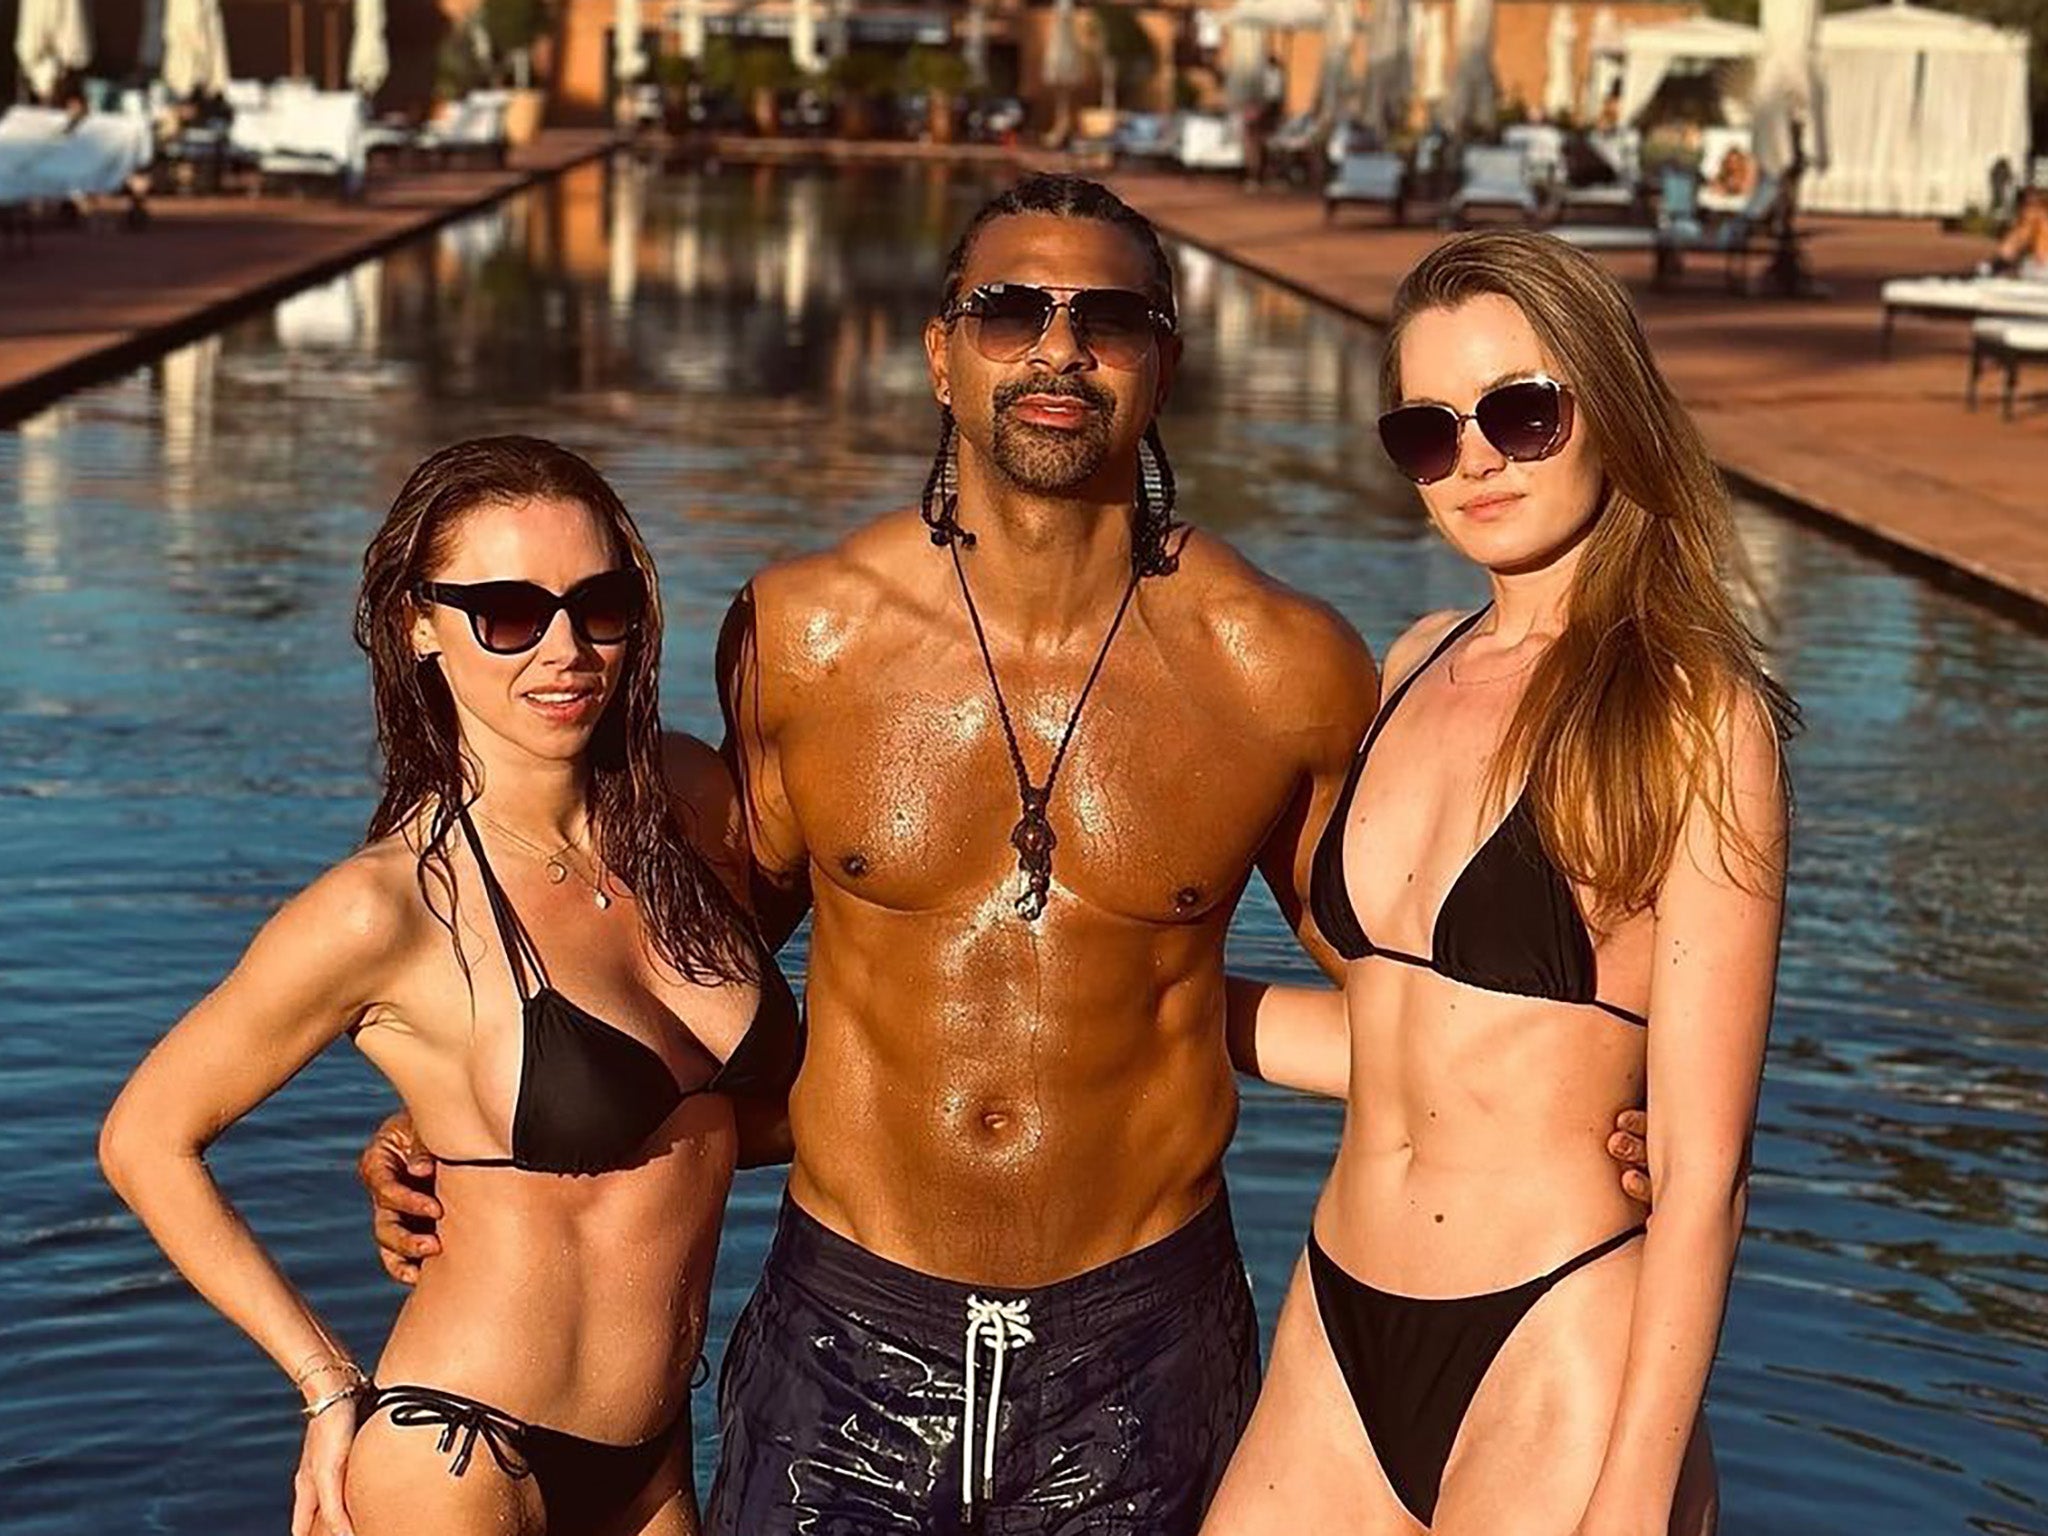 David Haye, Una Healy and Sian Osborne Can throuples or triad relationships really work? The Independent image